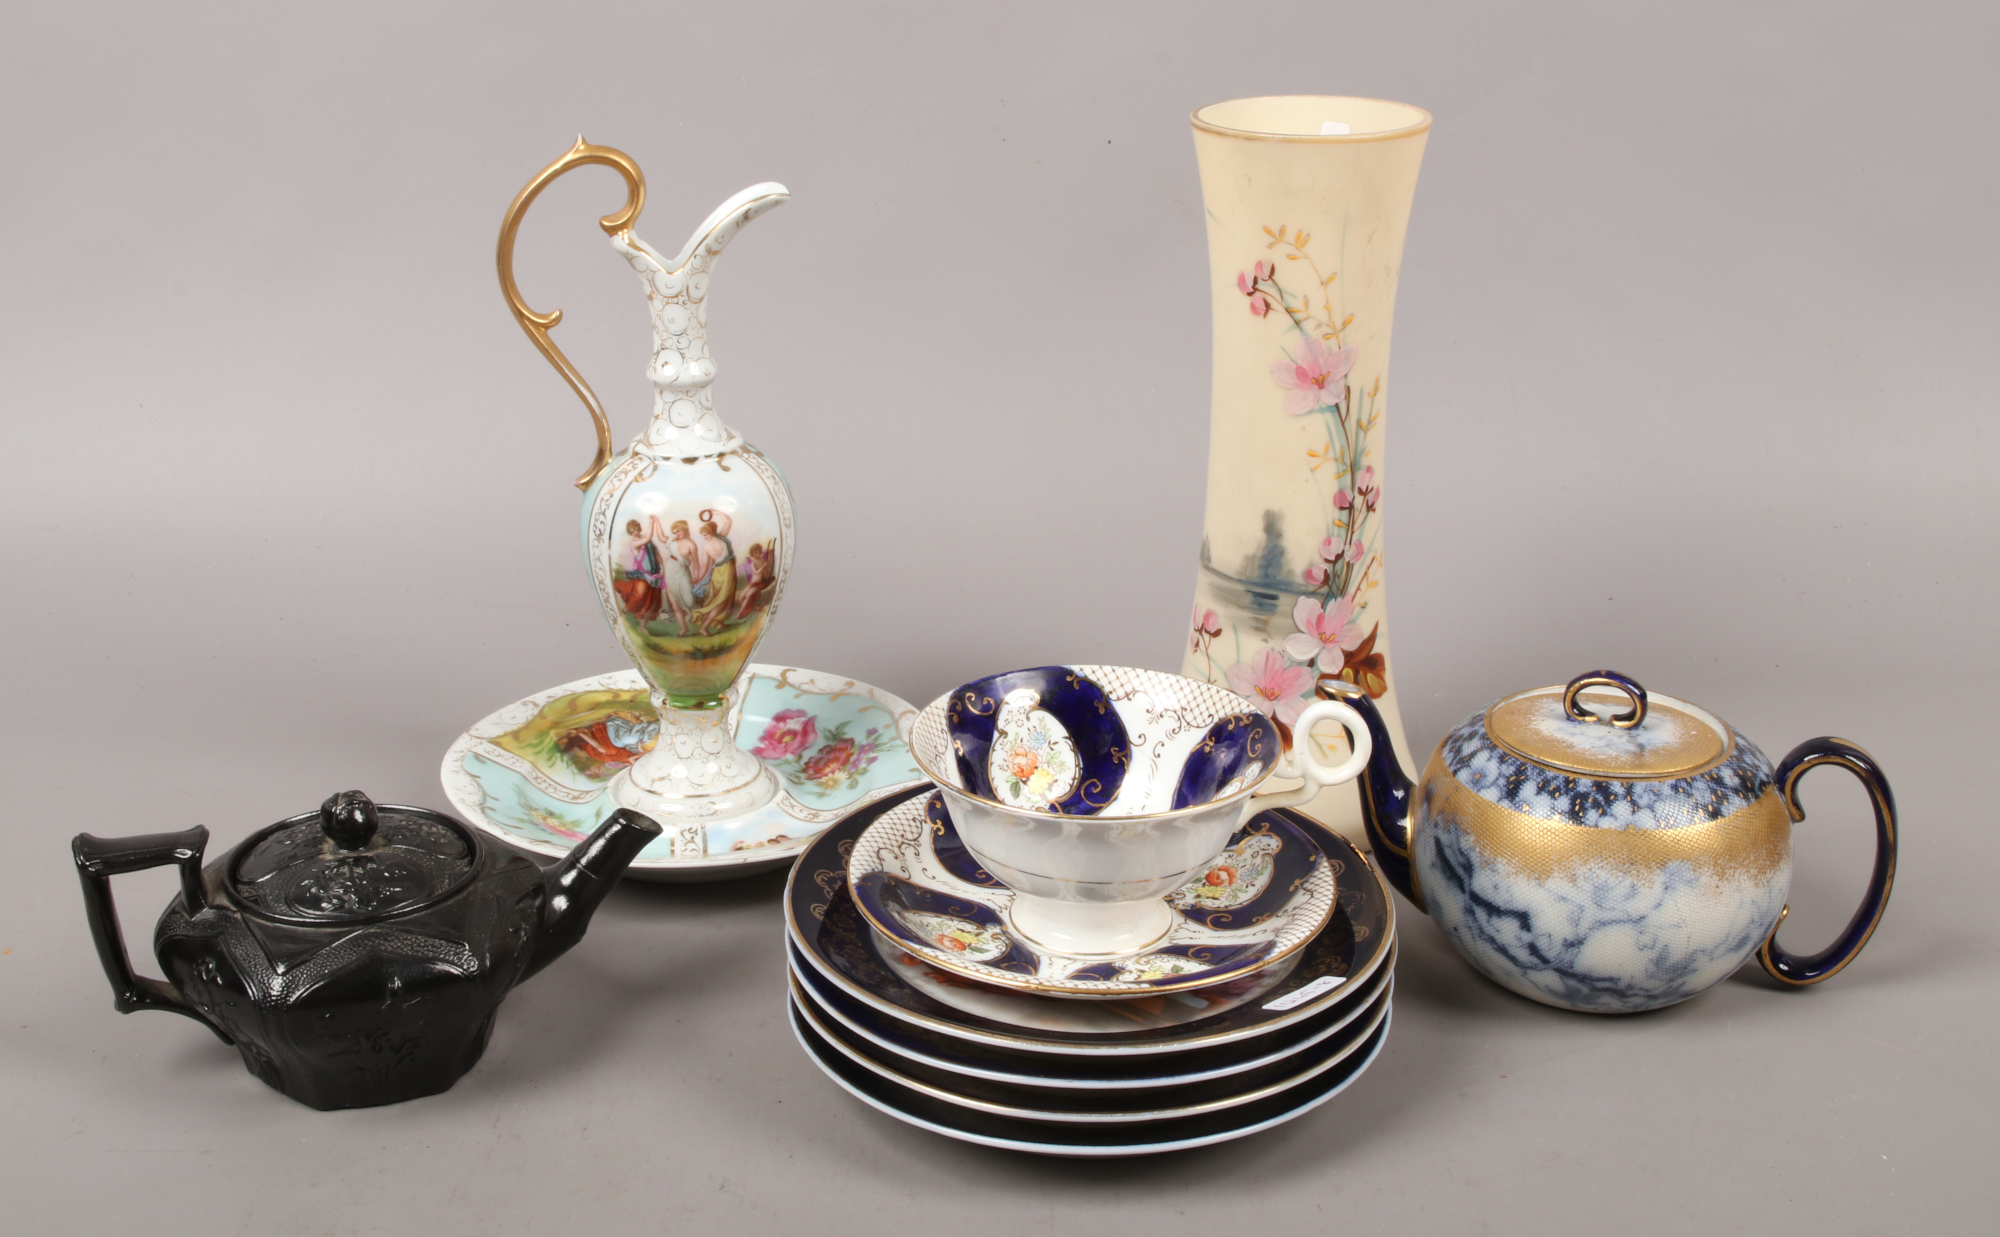 A mixed lot of china, pottery and glass including a Doulton Burslem teapot, Sizendorft style ewer on